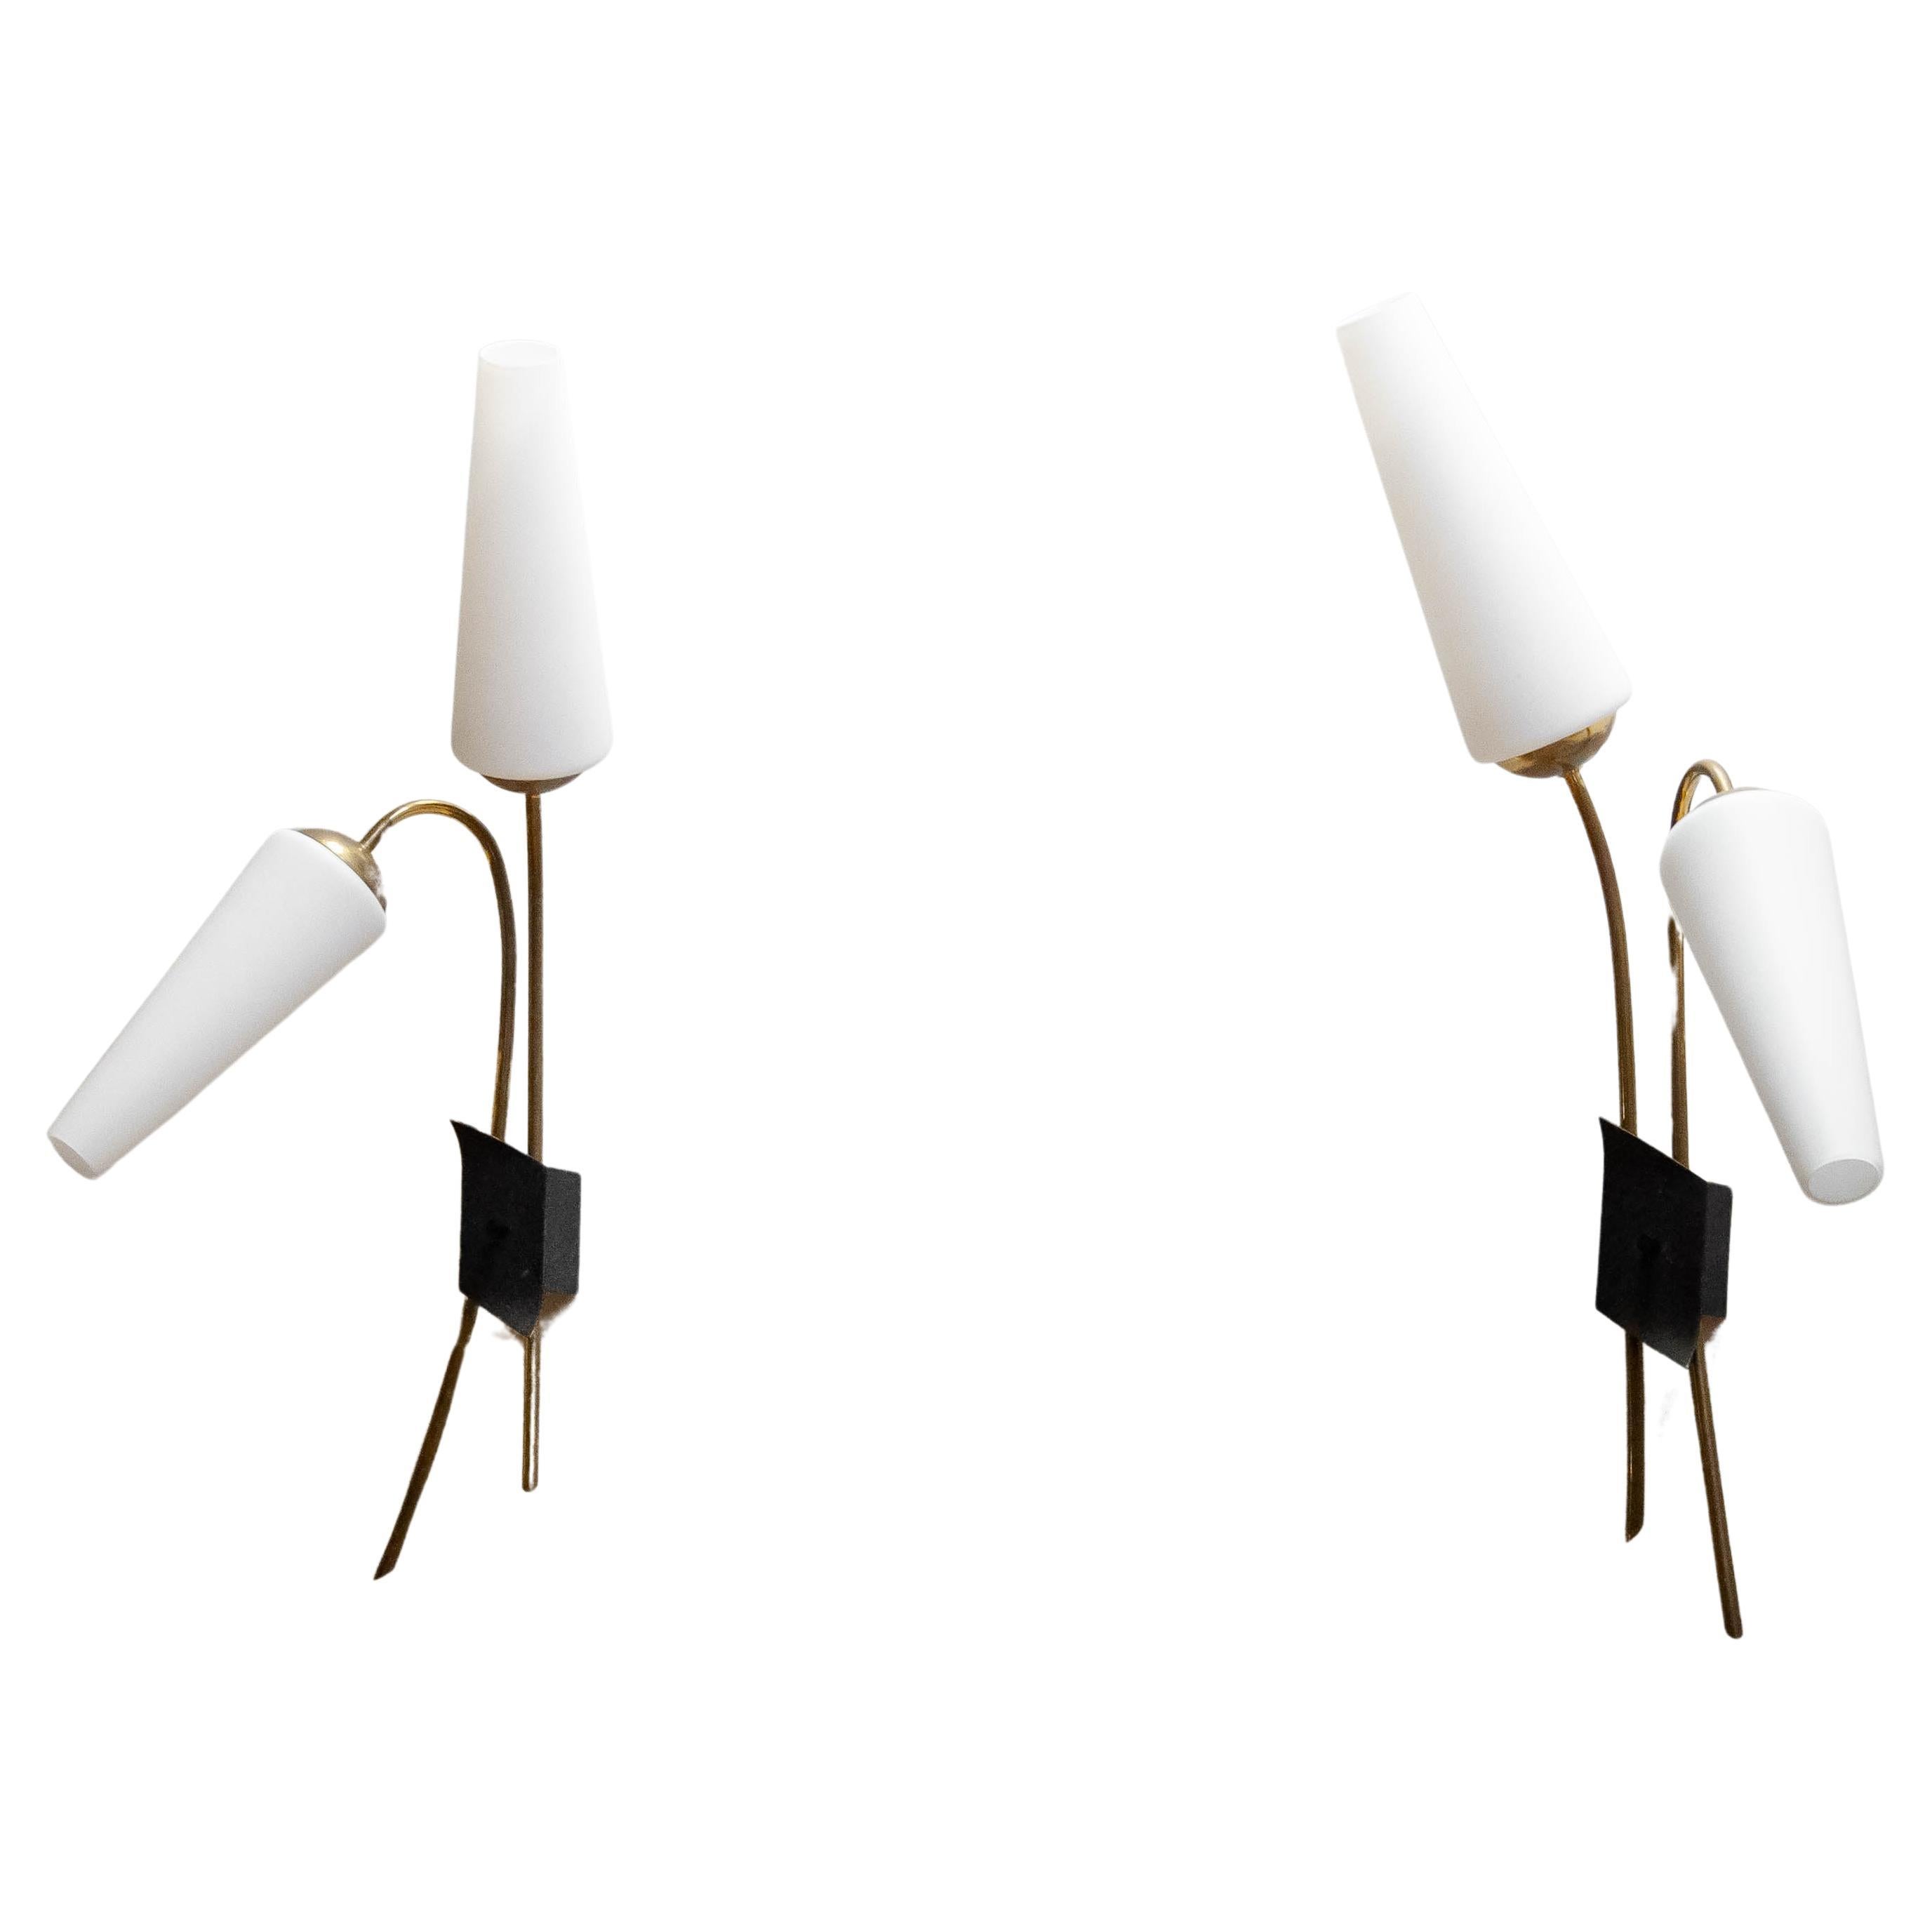 Pair French Brass And Opal Wall Lights / Sconces By Maison Lunel From The 1950s